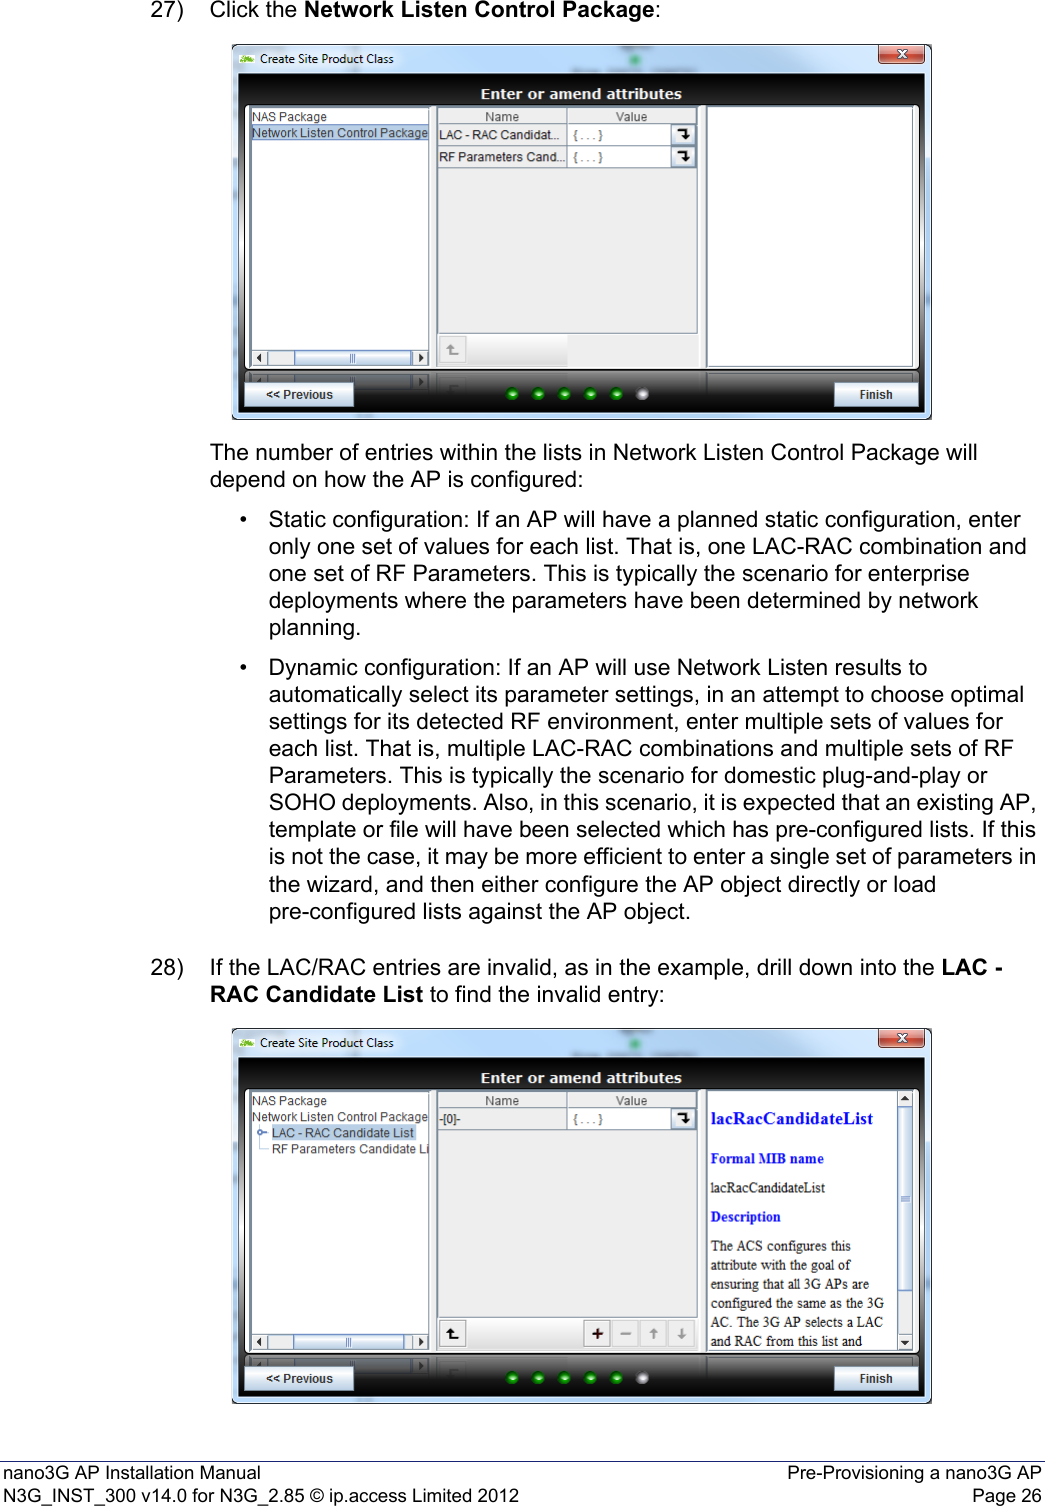 nano3G AP Installation Manual Pre-Provisioning a nano3G APN3G_INST_300 v14.0 for N3G_2.85 © ip.access Limited 2012 Page 2627) Click the Network Listen Control Package:The number of entries within the lists in Network Listen Control Package will depend on how the AP is configured:• Static configuration: If an AP will have a planned static configuration, enter only one set of values for each list. That is, one LAC-RAC combination and one set of RF Parameters. This is typically the scenario for enterprise deployments where the parameters have been determined by network planning. • Dynamic configuration: If an AP will use Network Listen results to automatically select its parameter settings, in an attempt to choose optimal settings for its detected RF environment, enter multiple sets of values for each list. That is, multiple LAC-RAC combinations and multiple sets of RF Parameters. This is typically the scenario for domestic plug-and-play or SOHO deployments. Also, in this scenario, it is expected that an existing AP, template or file will have been selected which has pre-configured lists. If this is not the case, it may be more efficient to enter a single set of parameters in the wizard, and then either configure the AP object directly or load pre-configured lists against the AP object. 28) If the LAC/RAC entries are invalid, as in the example, drill down into the LAC - RAC Candidate List to find the invalid entry: 